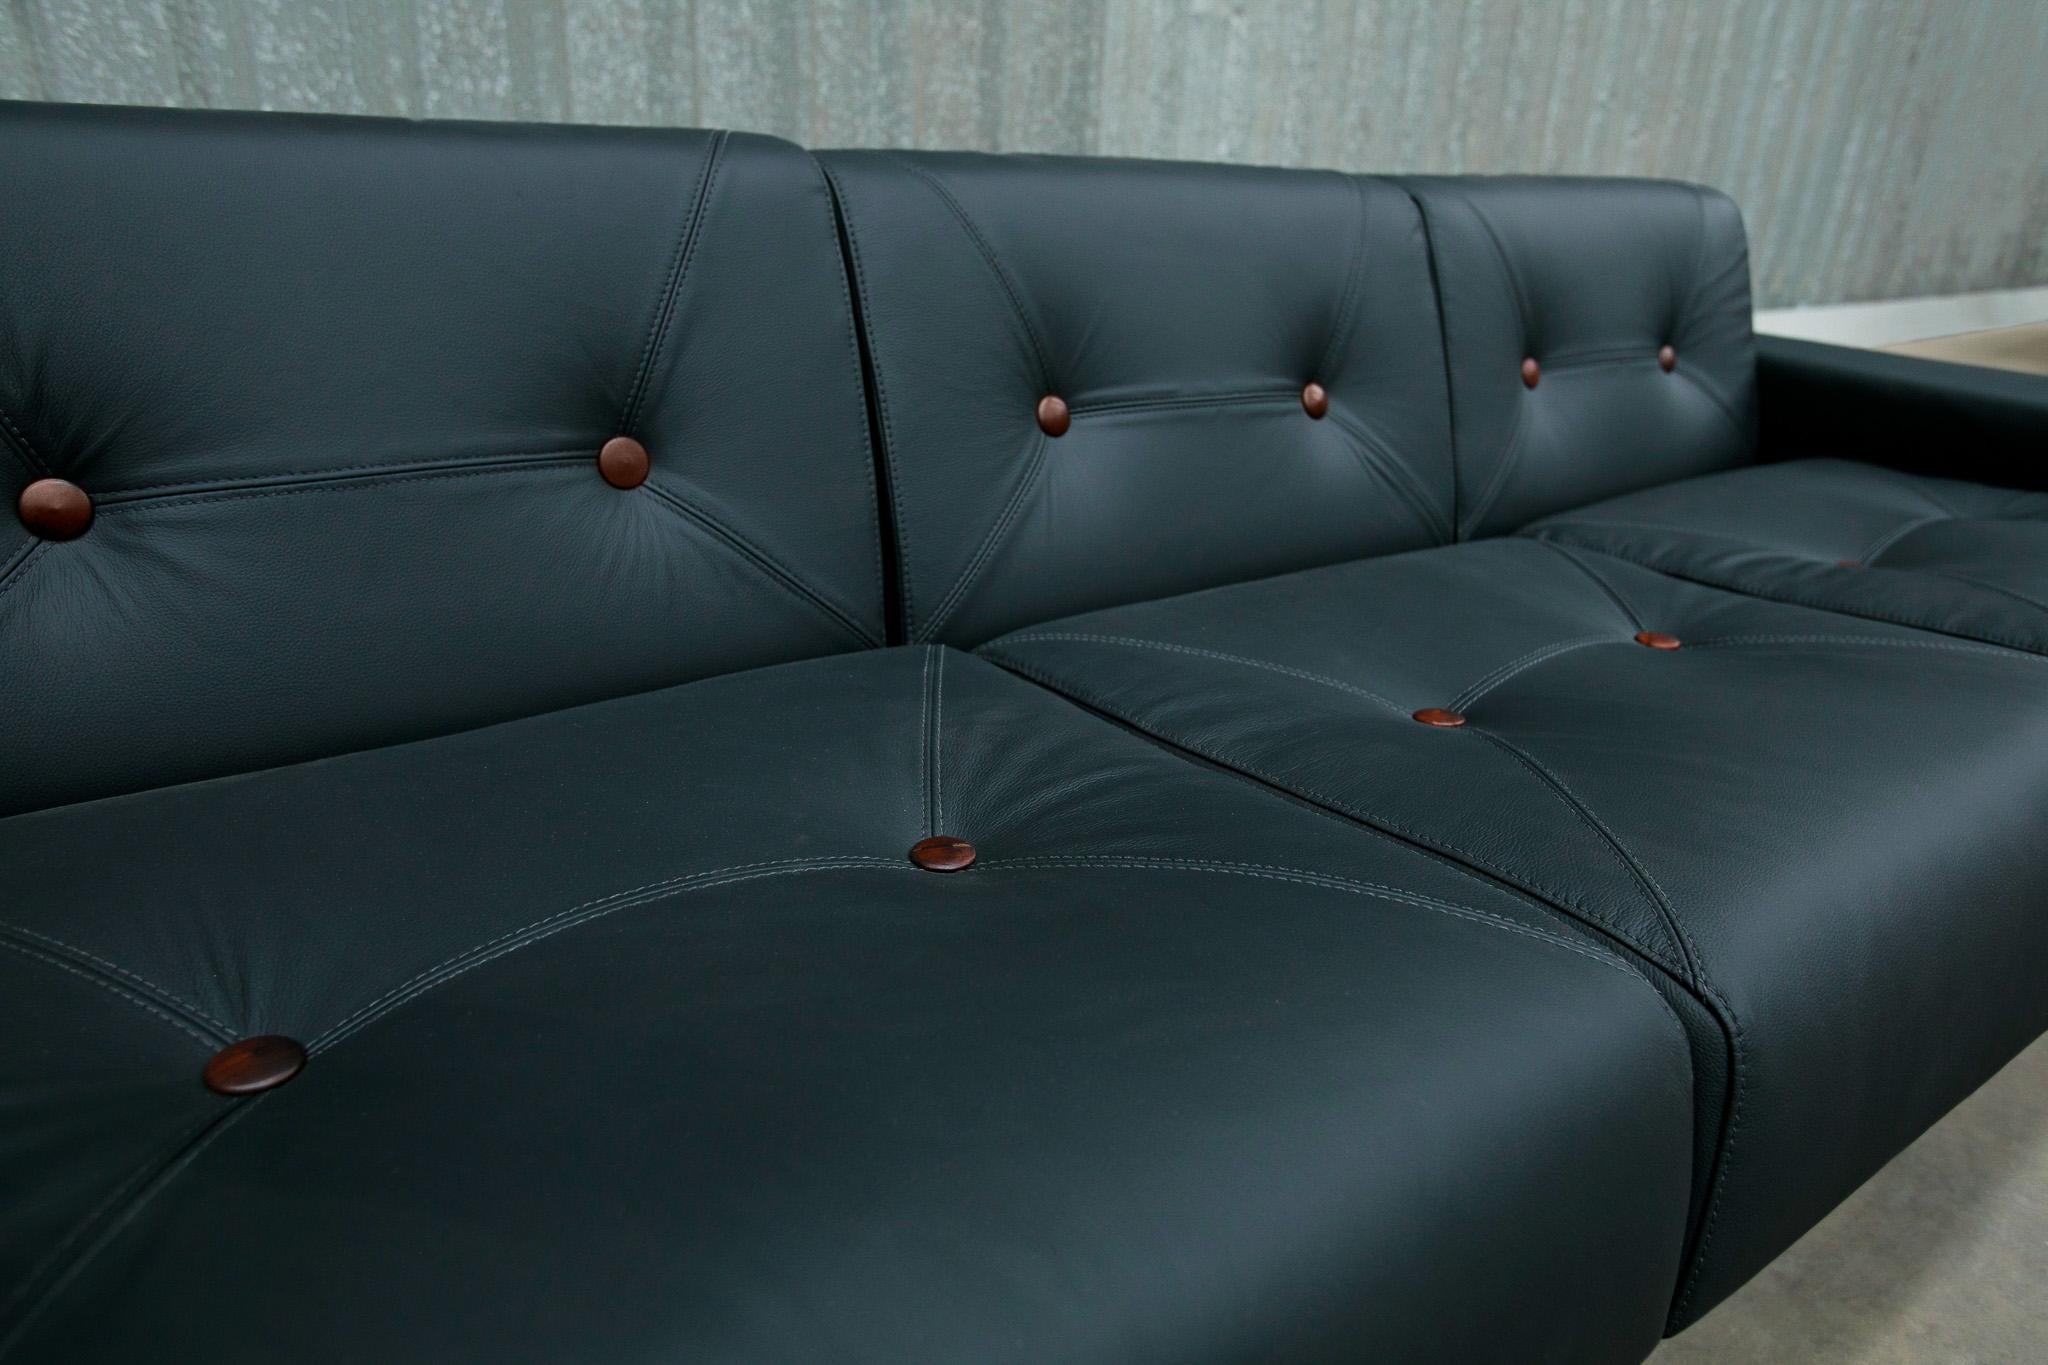 20th Century Mid-Century Modern Sofa in Black Leather & Wood by Jorge Zalszupin, Brazil, 1970 For Sale